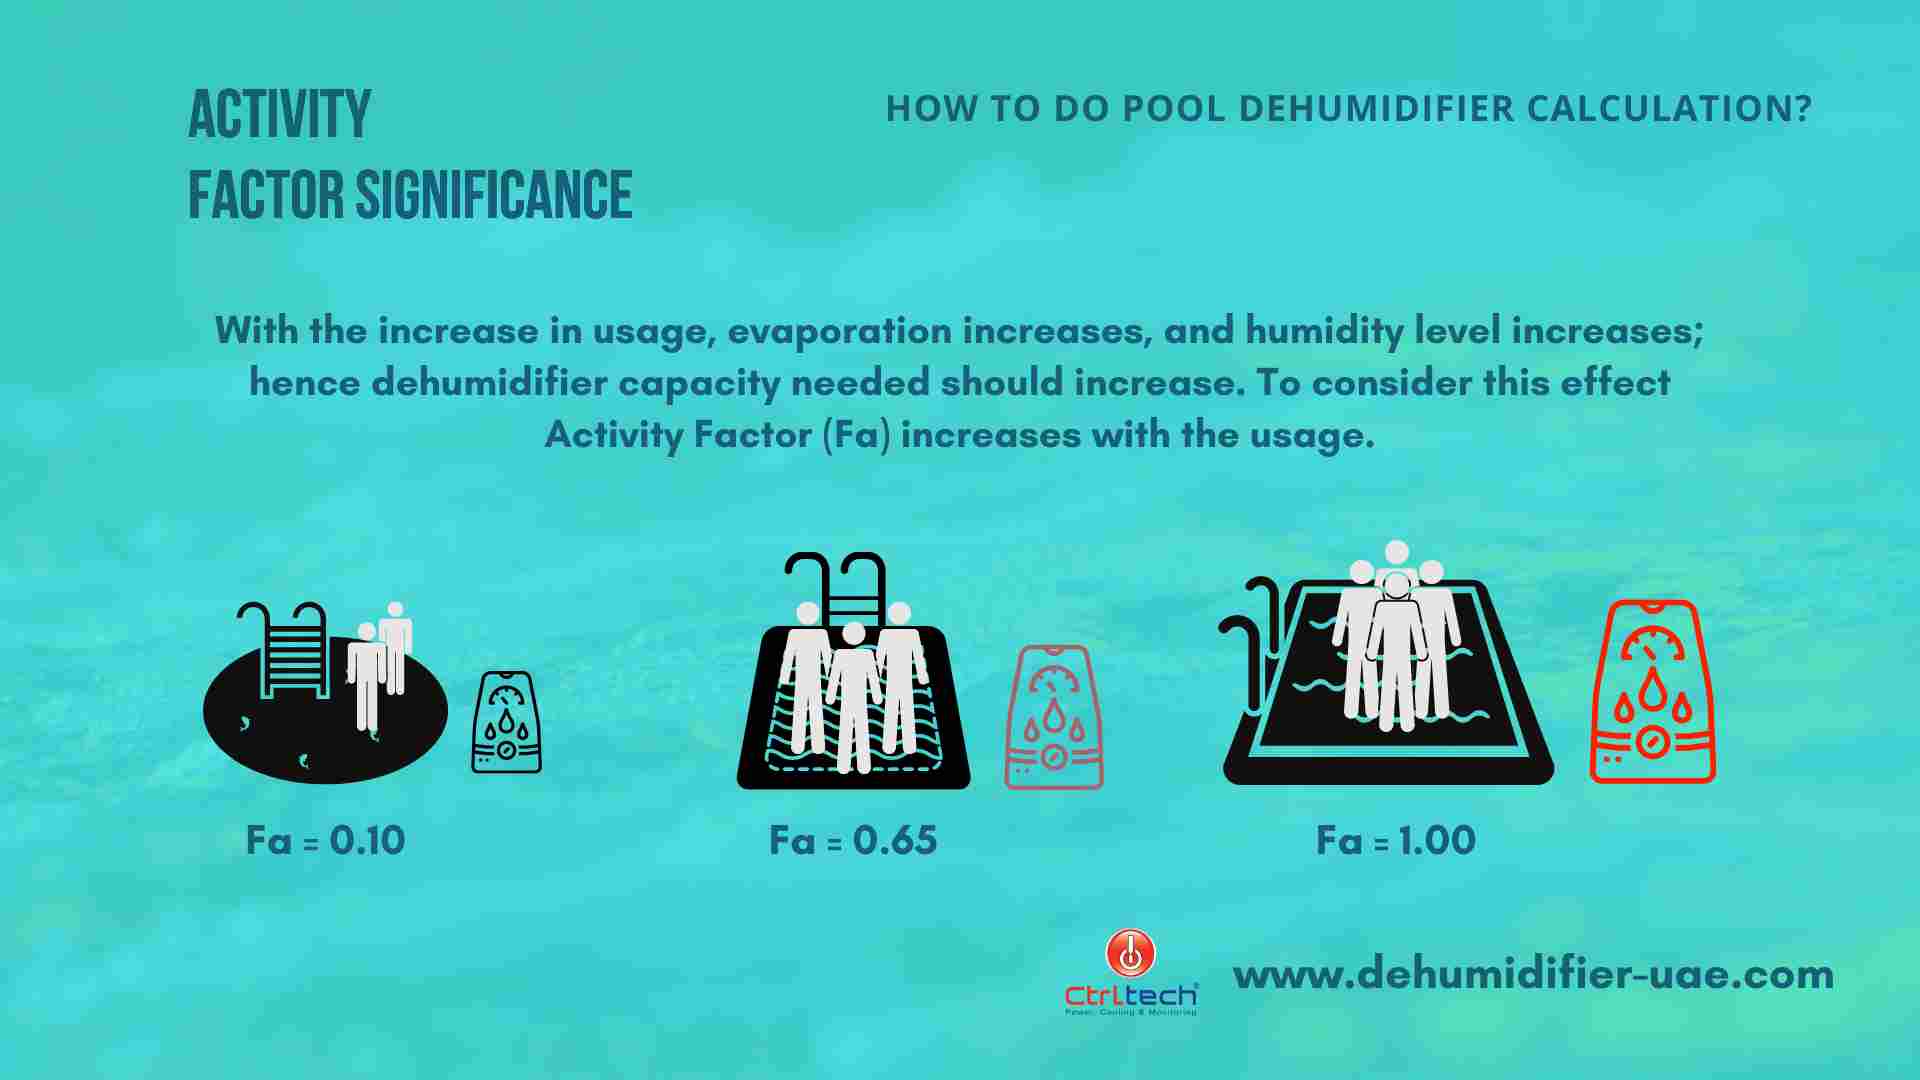 SStep 3 Activity Factor (Fa) for pool dehumidifier selection